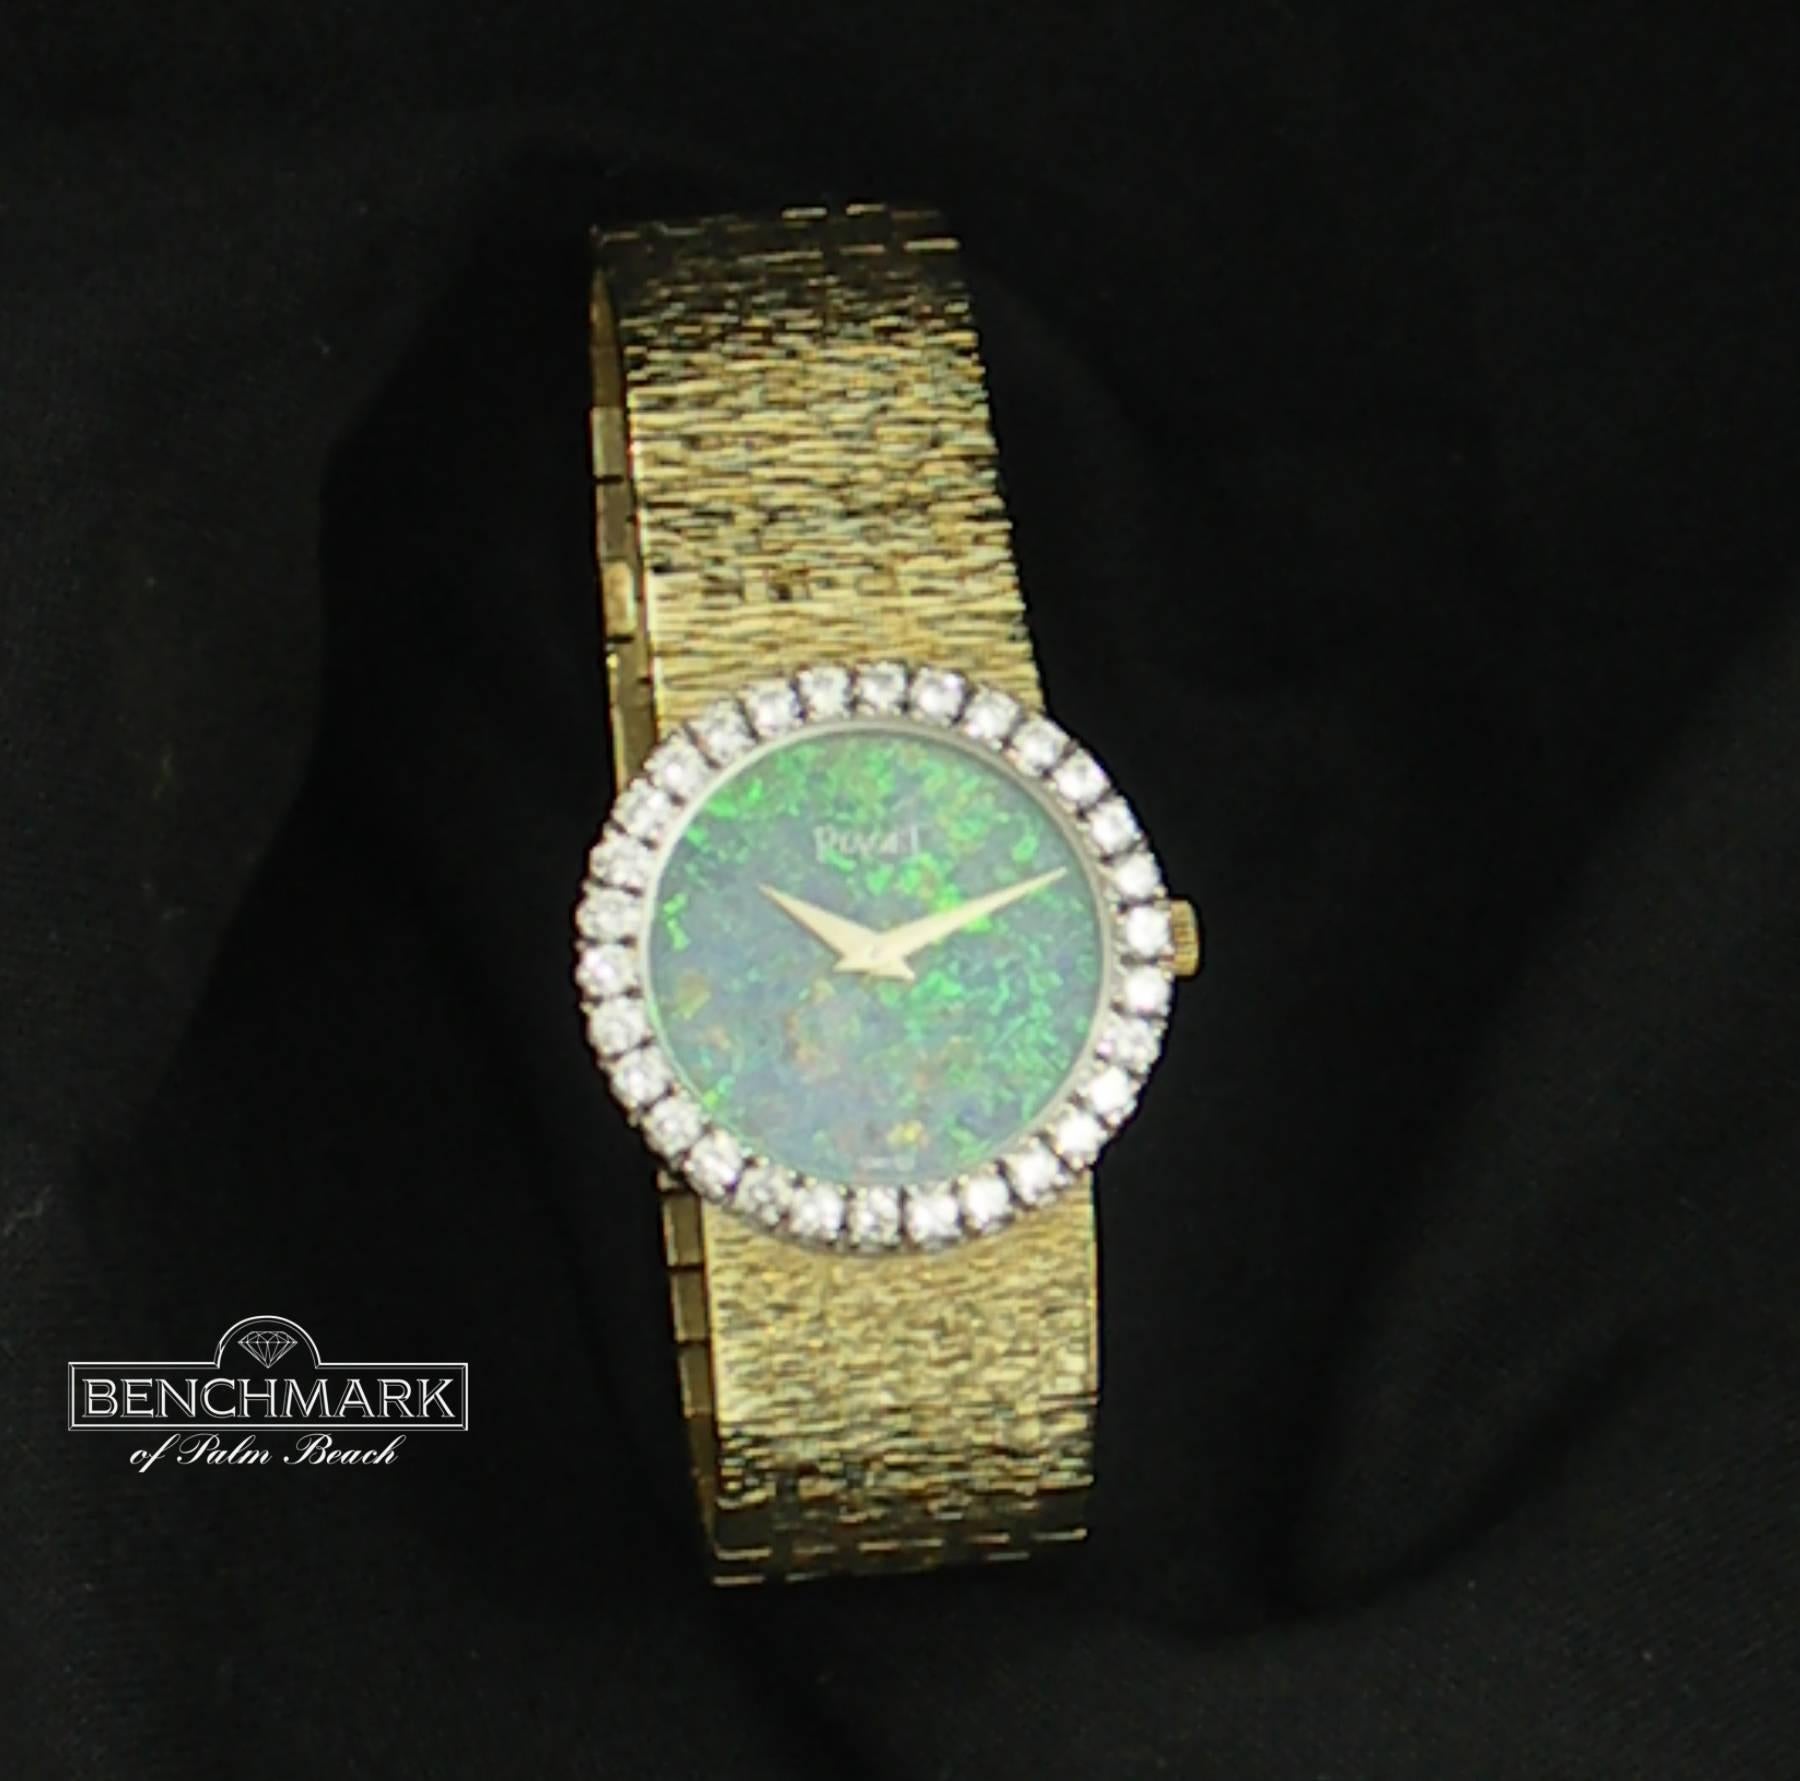 A ladies 18K yellow gold wristwatch centered around a rare opal dial, surrounded by a bezel, set with 30 round brilliant cut diamonds weighing 1.50ct total approximate weight. Case, dial, and quartz movement are each signed Piaget. The inside